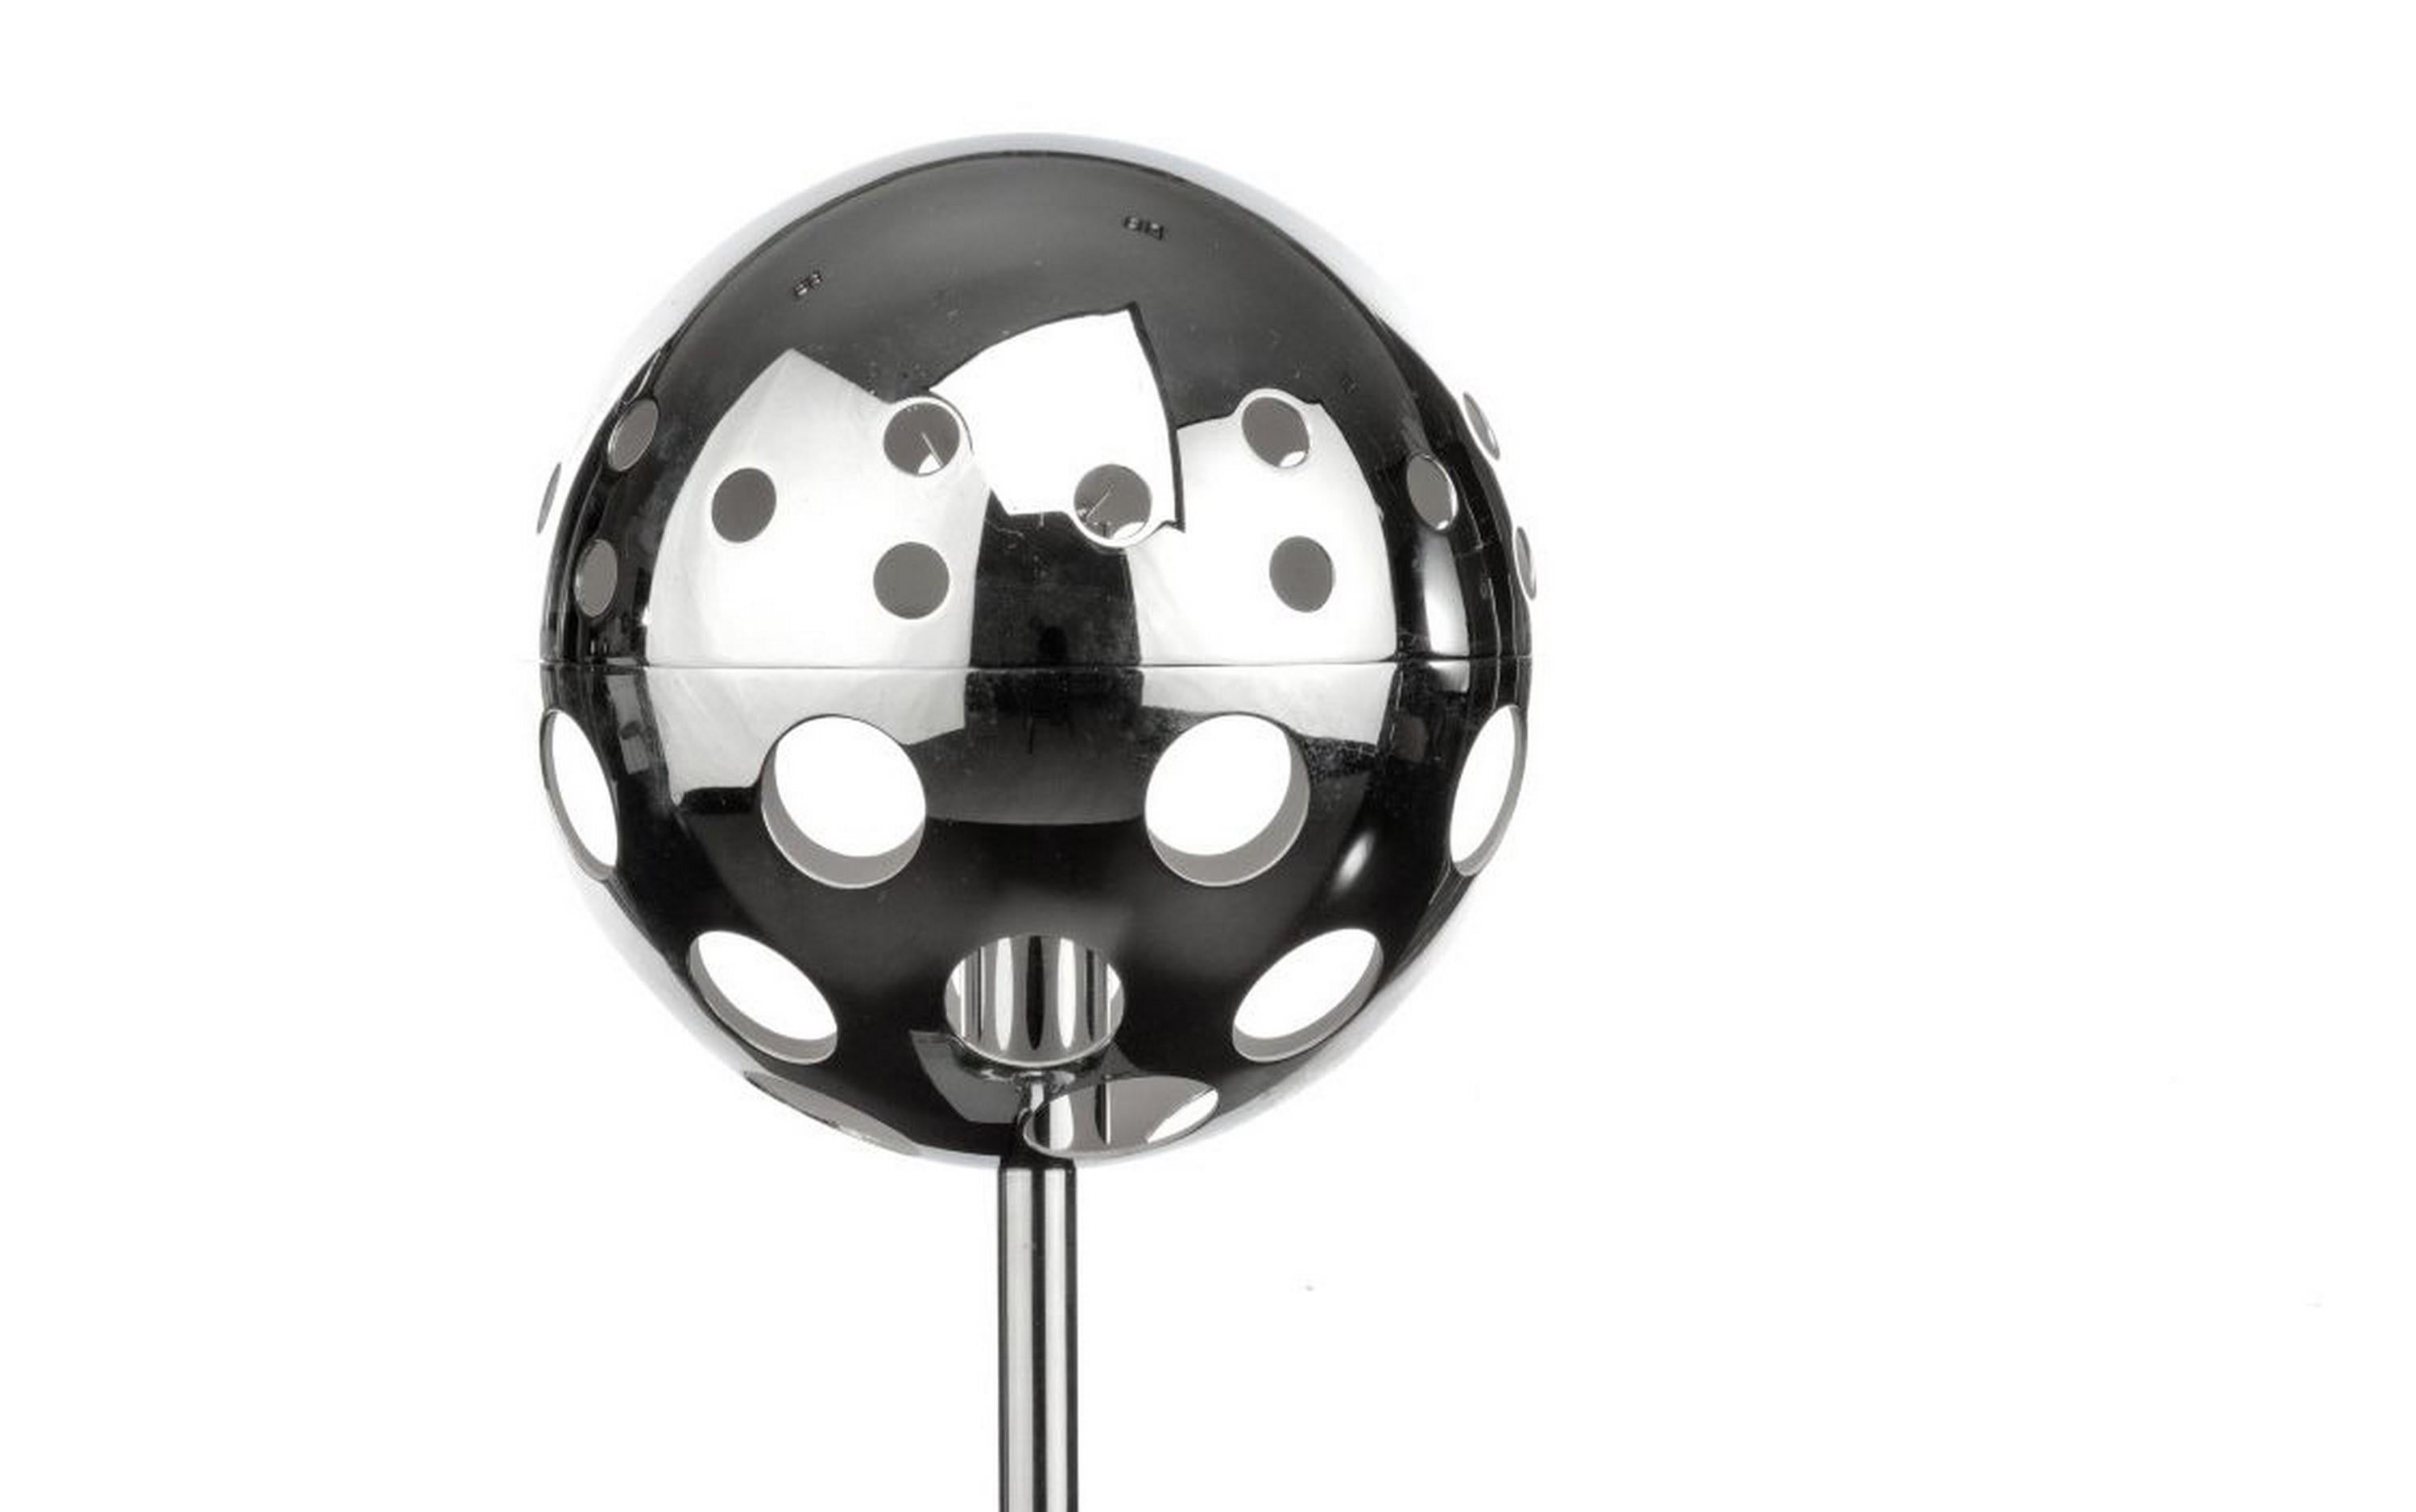 Polished chrome table lamp with spherical shade pierced with holes to allow the light to exit. This gives a very decorative effect in the room. The top of the sphere is removable to replace the bulb.